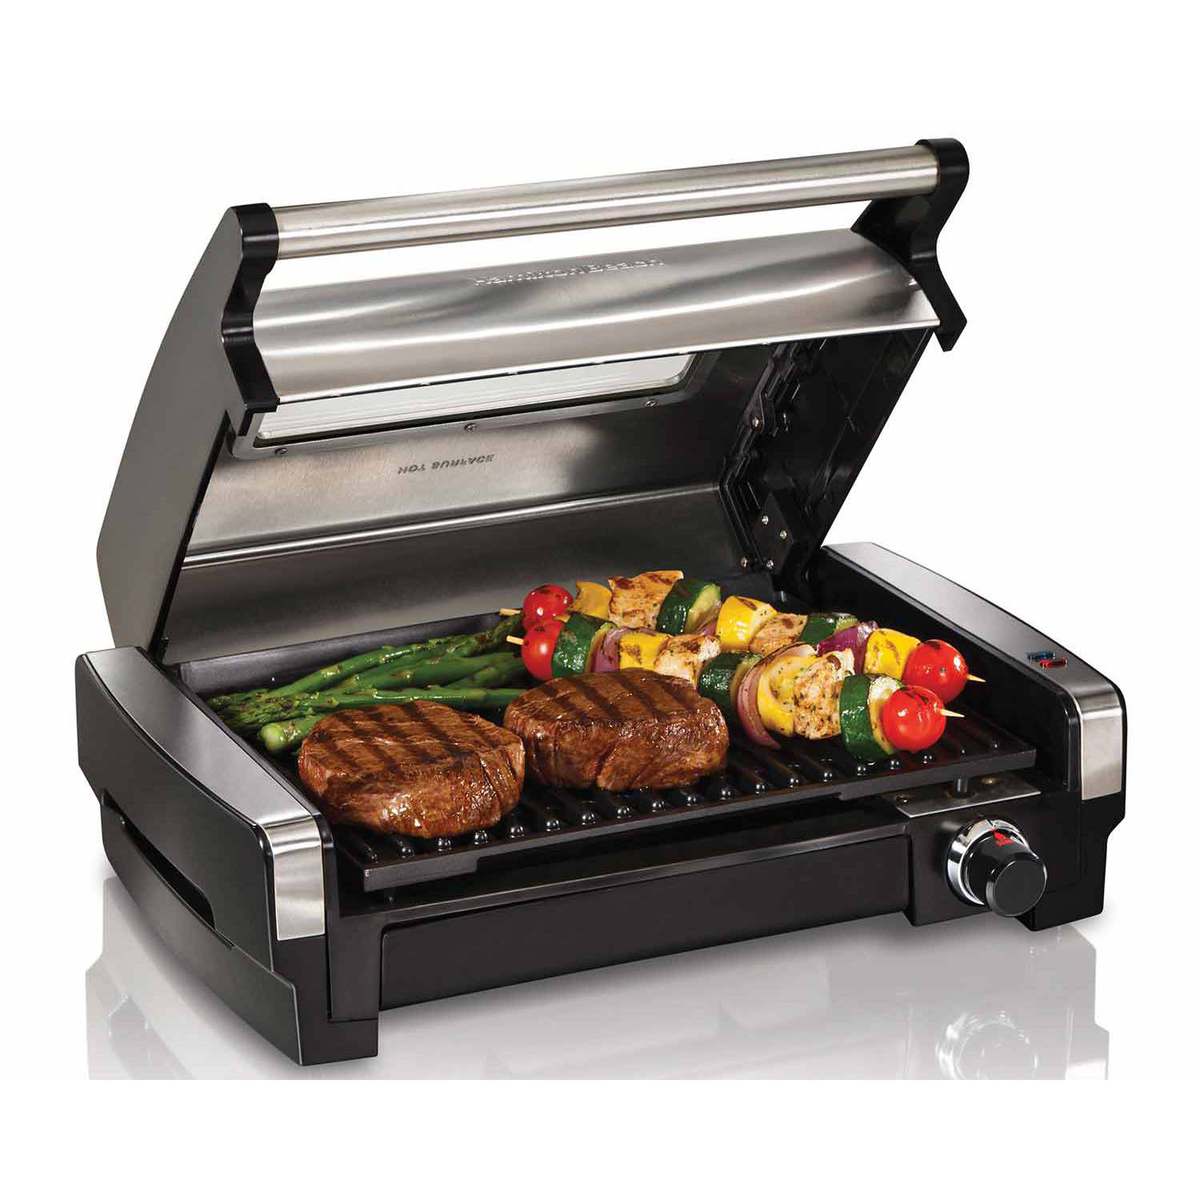 Searing Grill with Viewing Window and Removable Plates (25361C)